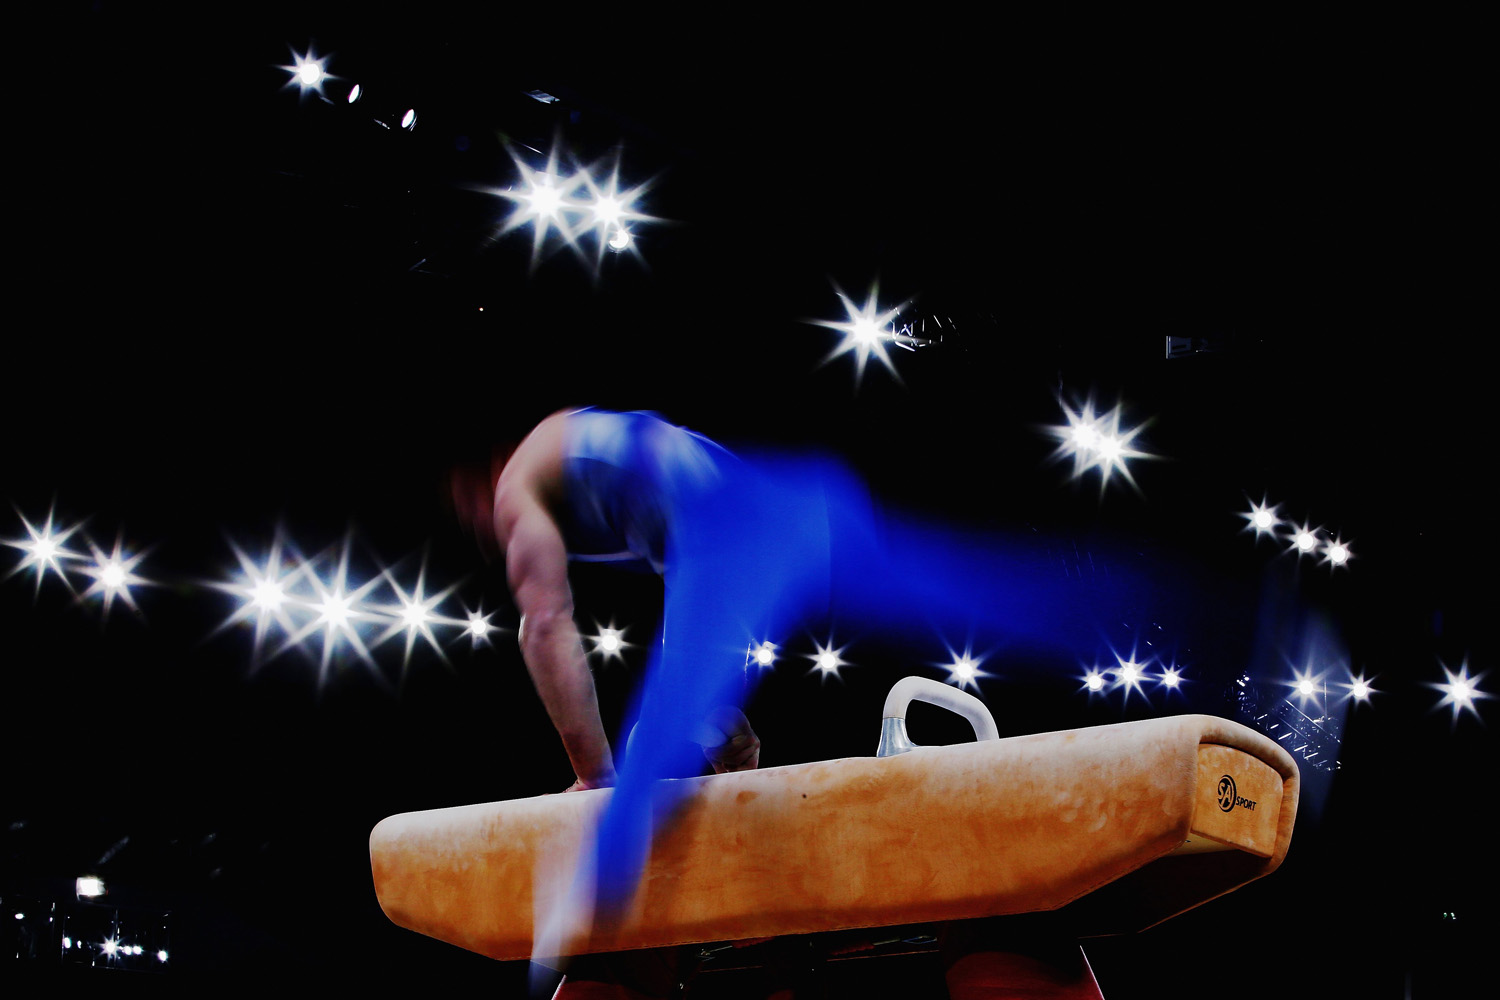 Daniel Purvis of Scotland competes in the Men's Team Final Individual Qualification at SECC Precinct during day five of the Glasgow 2014 Commonwealth Games on July 28, 2014 in Glasgow, United Kingdom.